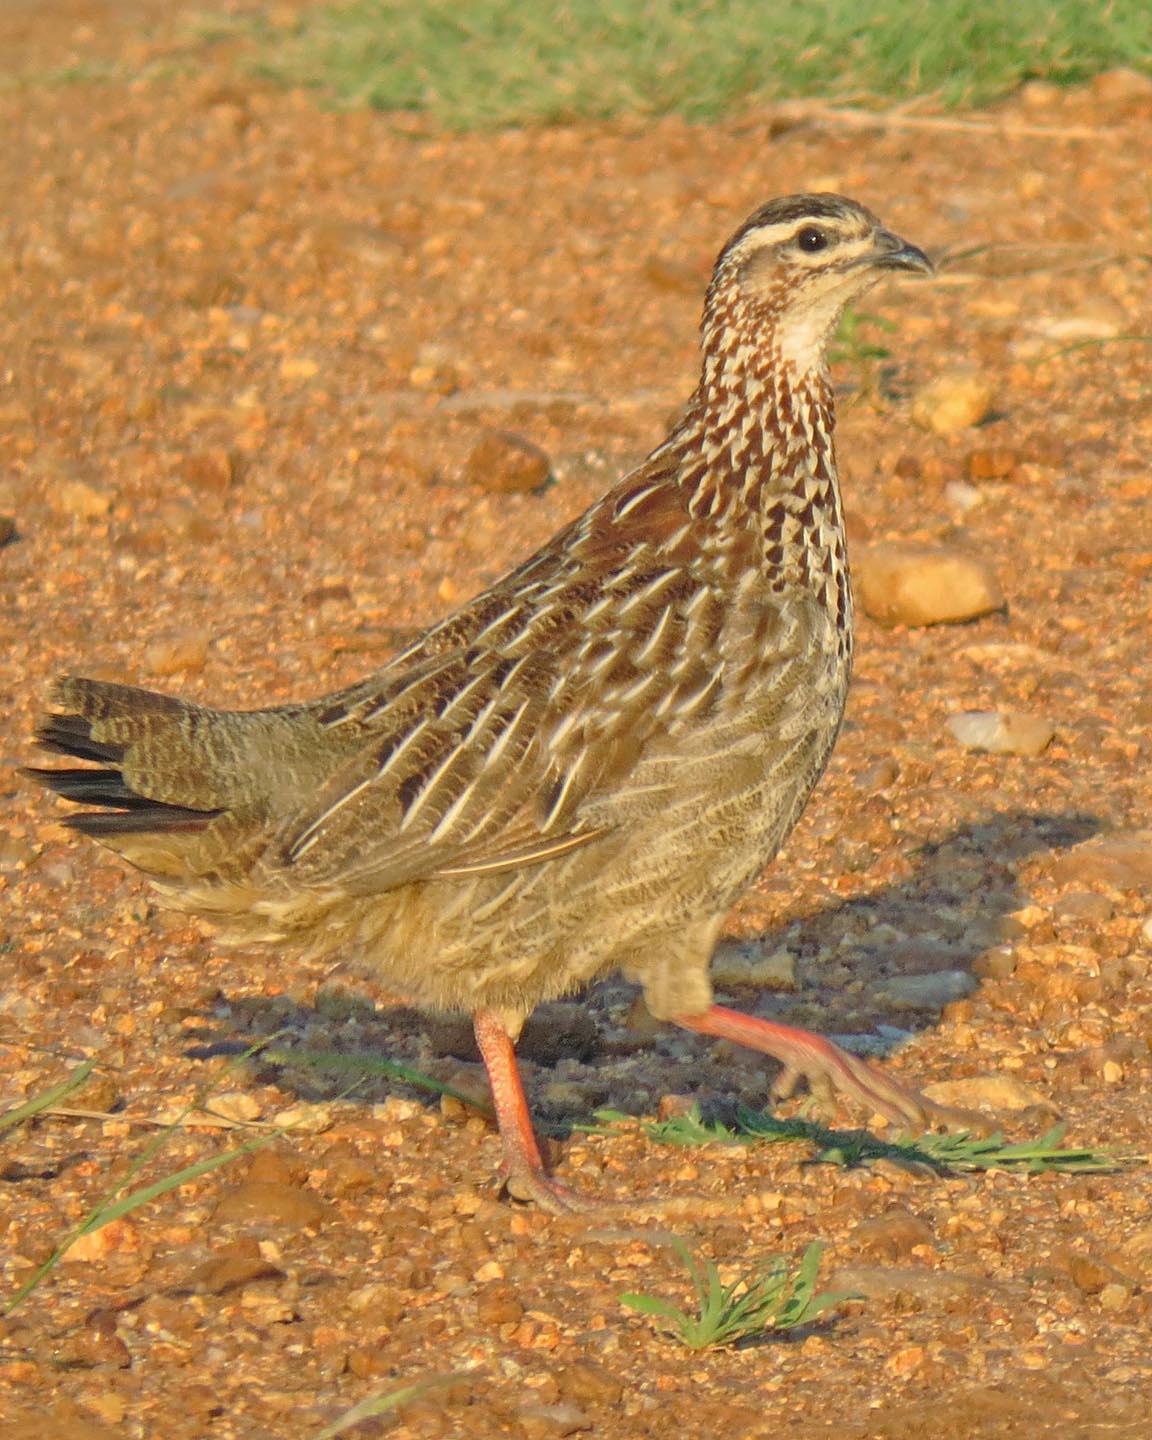 Crested Francolin Photo by Peter Boesman